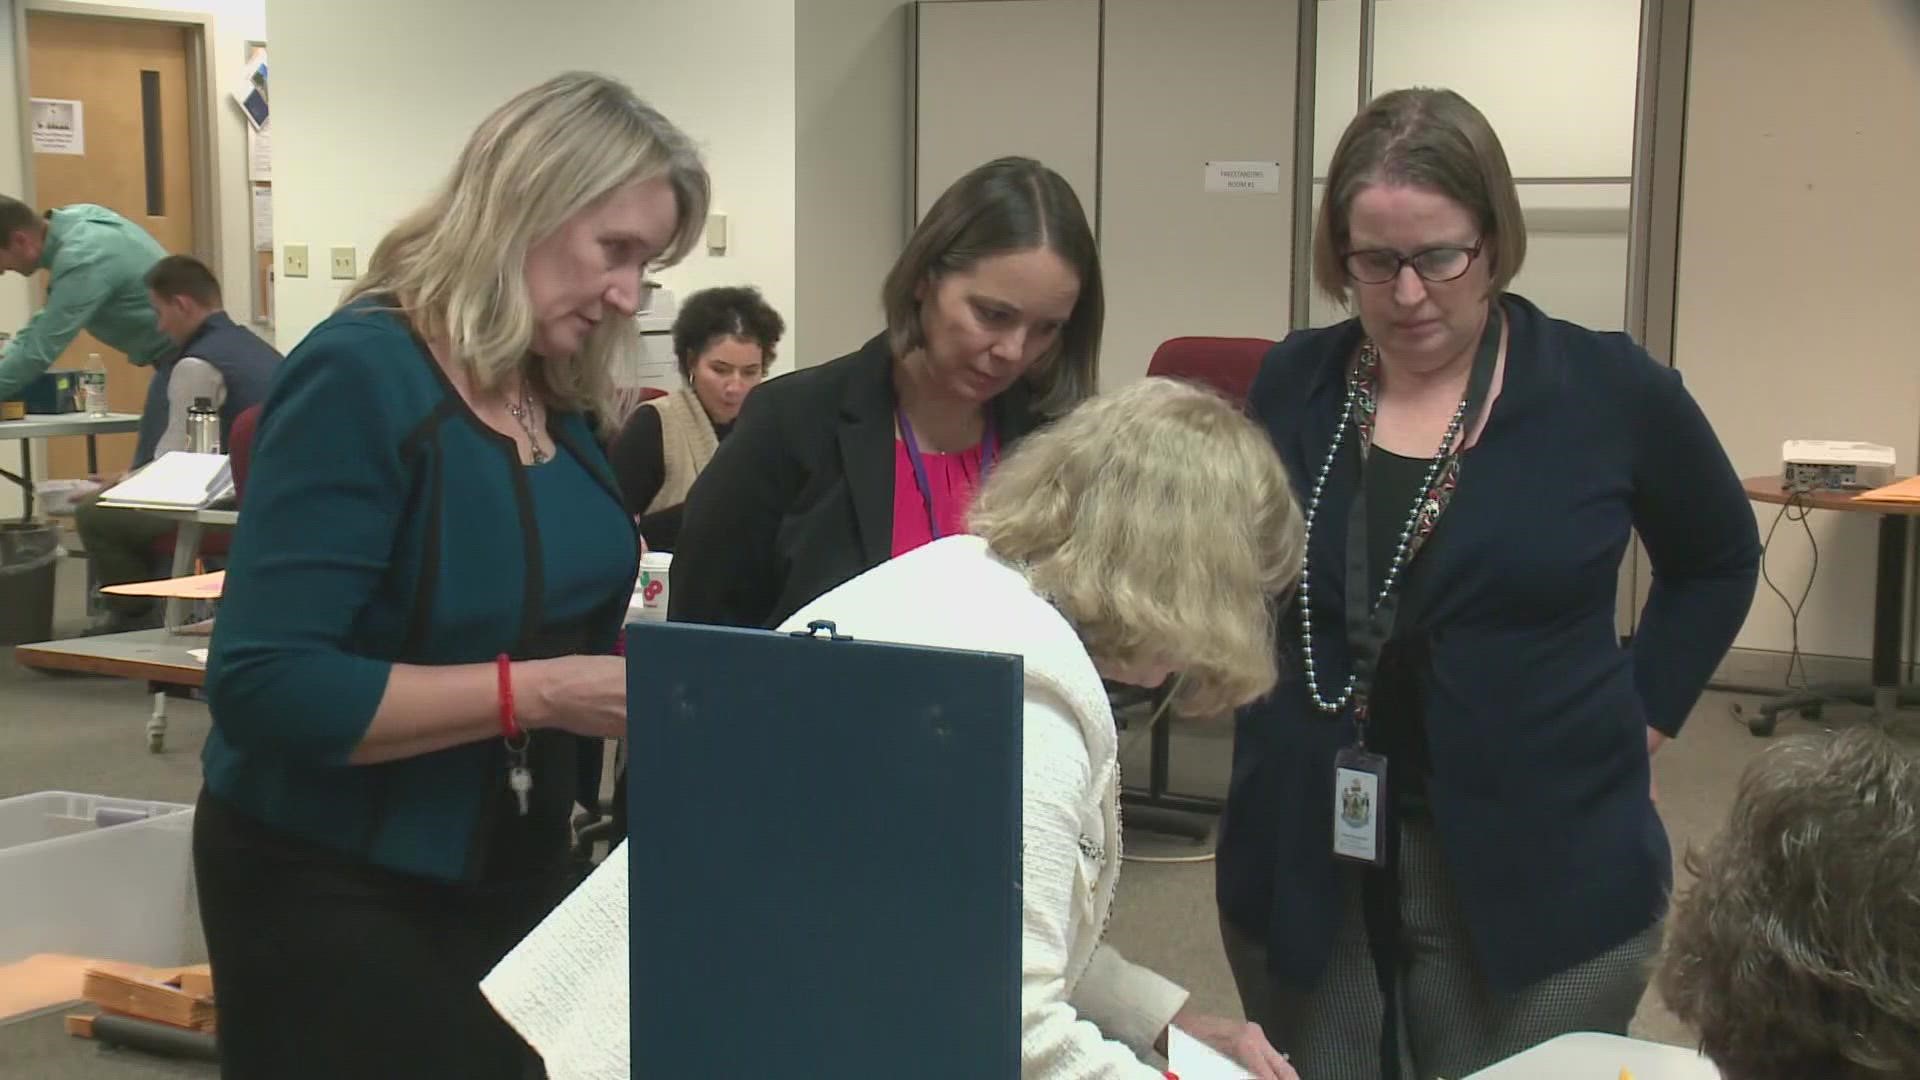 More than 16,000 ballots are to be recounted from Bangor and Hampden.